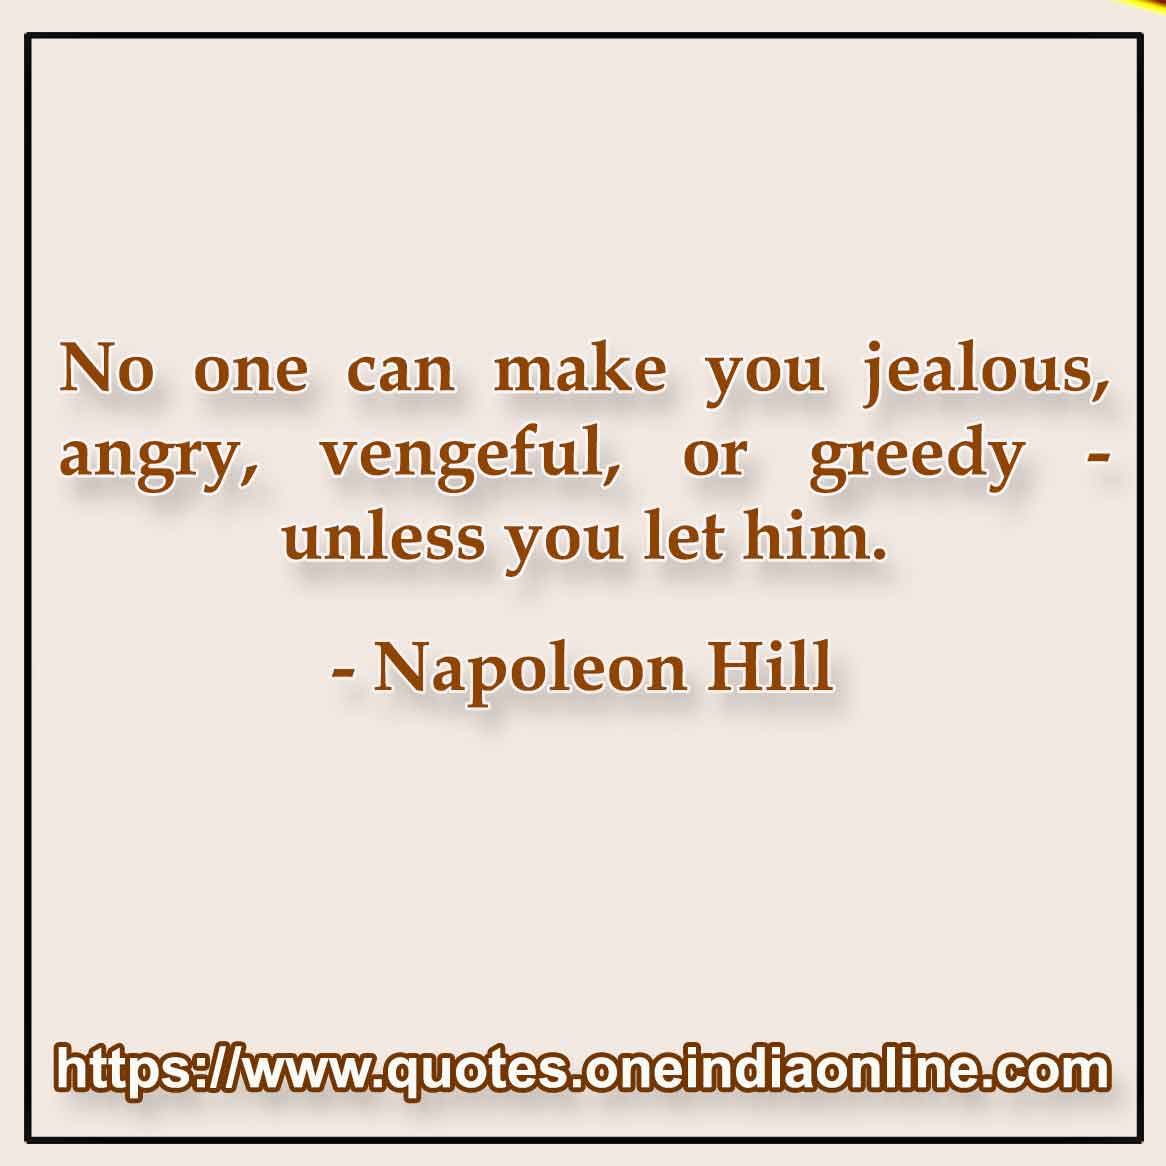 No one can make you jealous, angry, vengeful, or greedy - unless you let him.

- Famous Quotations in English by Napoleon Hill